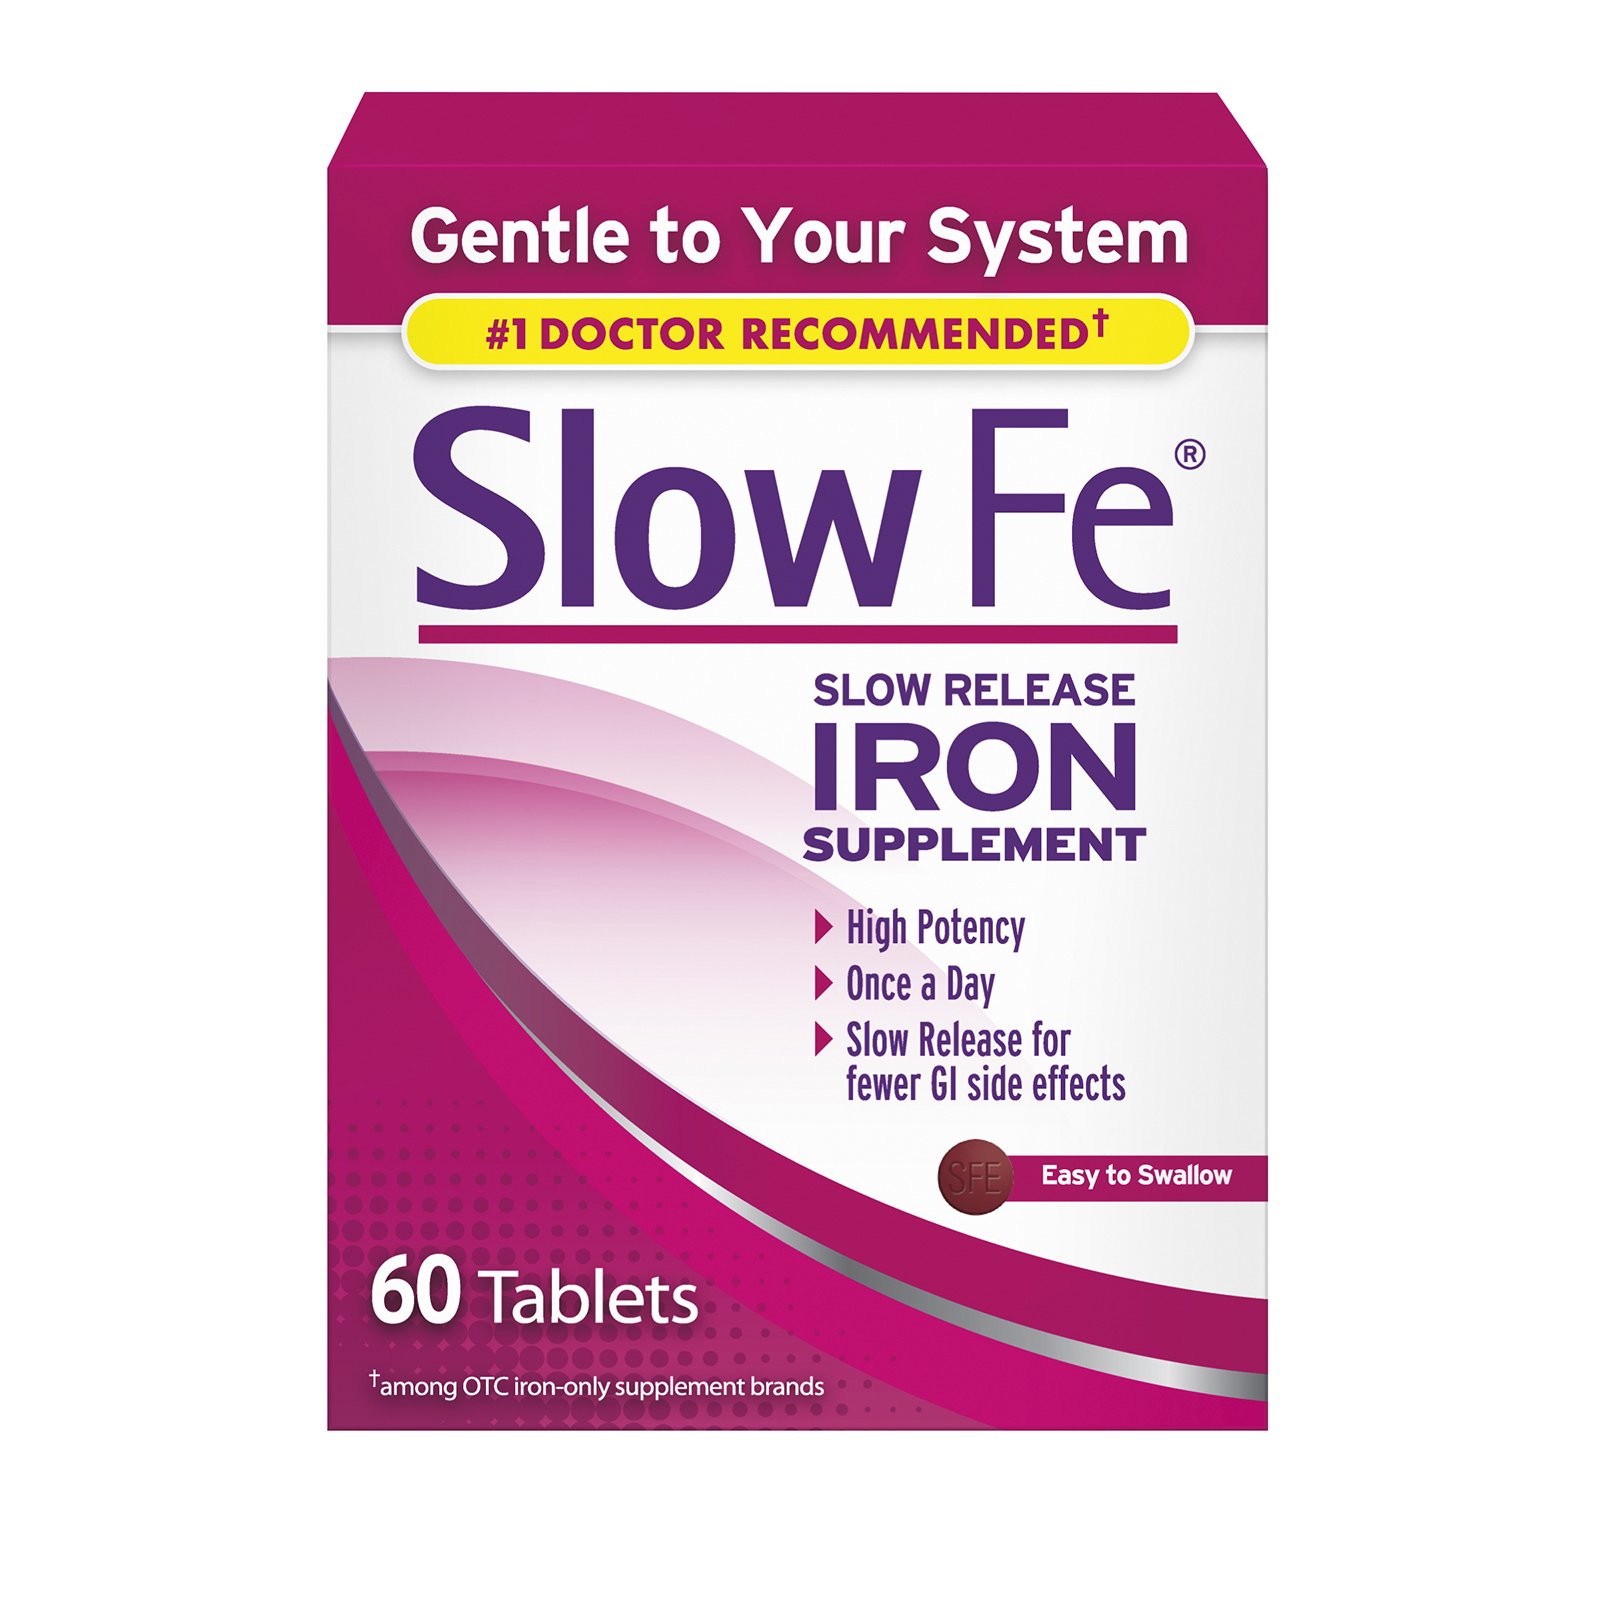 Slow Fe 45mg Iron Supplement for Iron Deficiency, Slow Release, High Potency & Colace Clear Stool Softener Soft Gel Capsules Constipation Relief 50mg Docusate Sodium Doctor Recommended 28ct